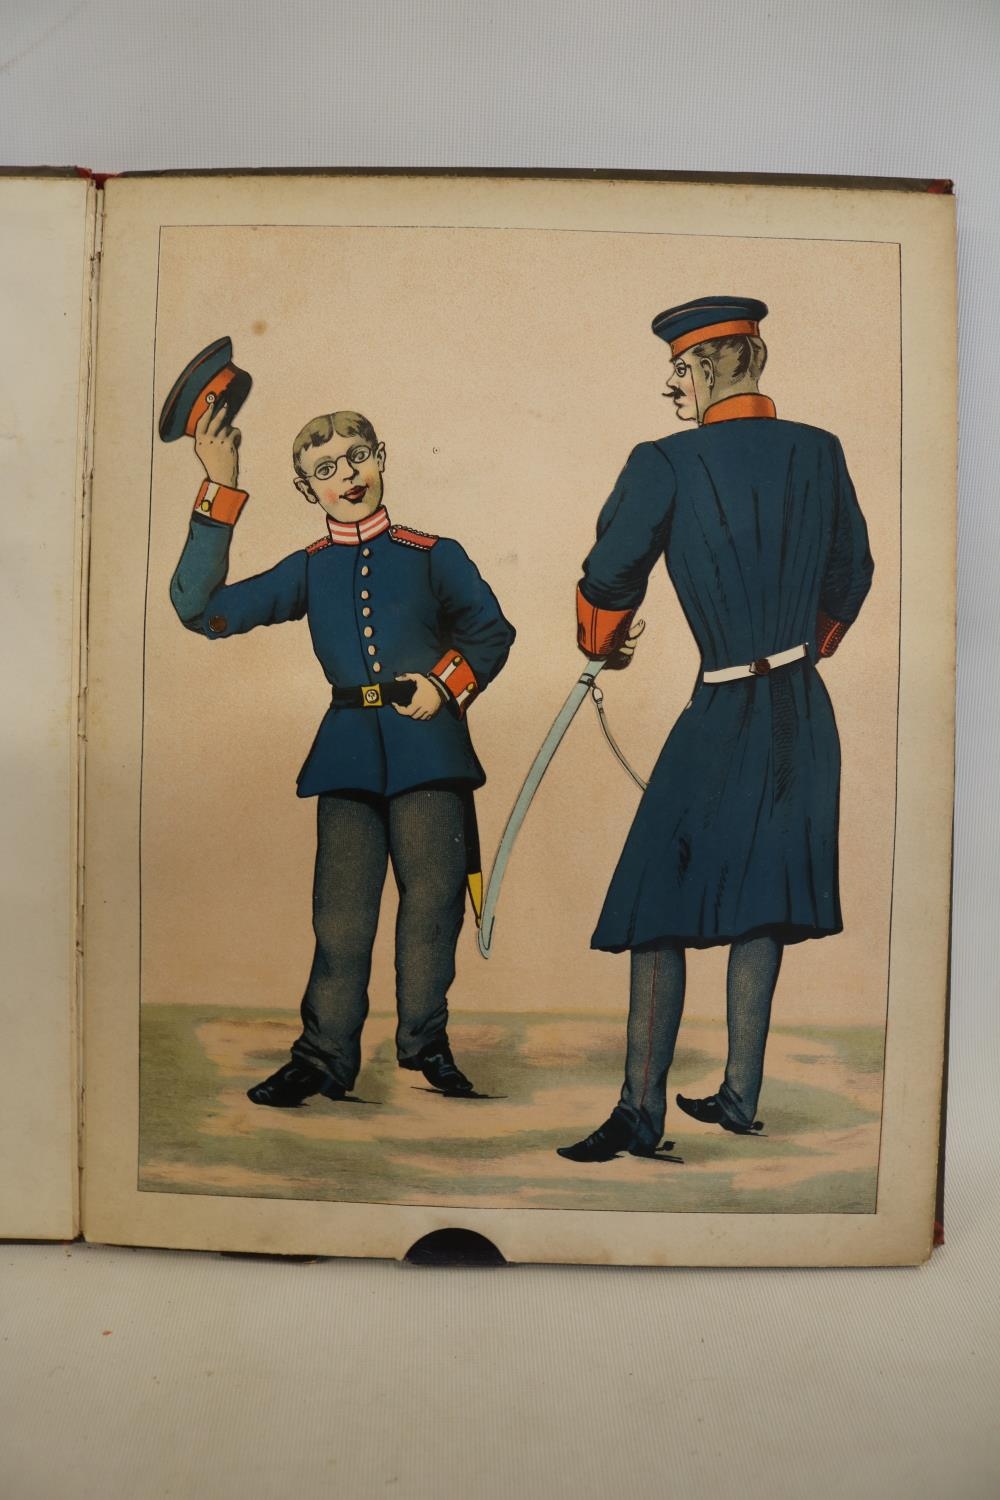 Our Soldiers in moving Pictures by Willibald King published Wilh.Effenberger F.Loewes Verlag - Image 4 of 5